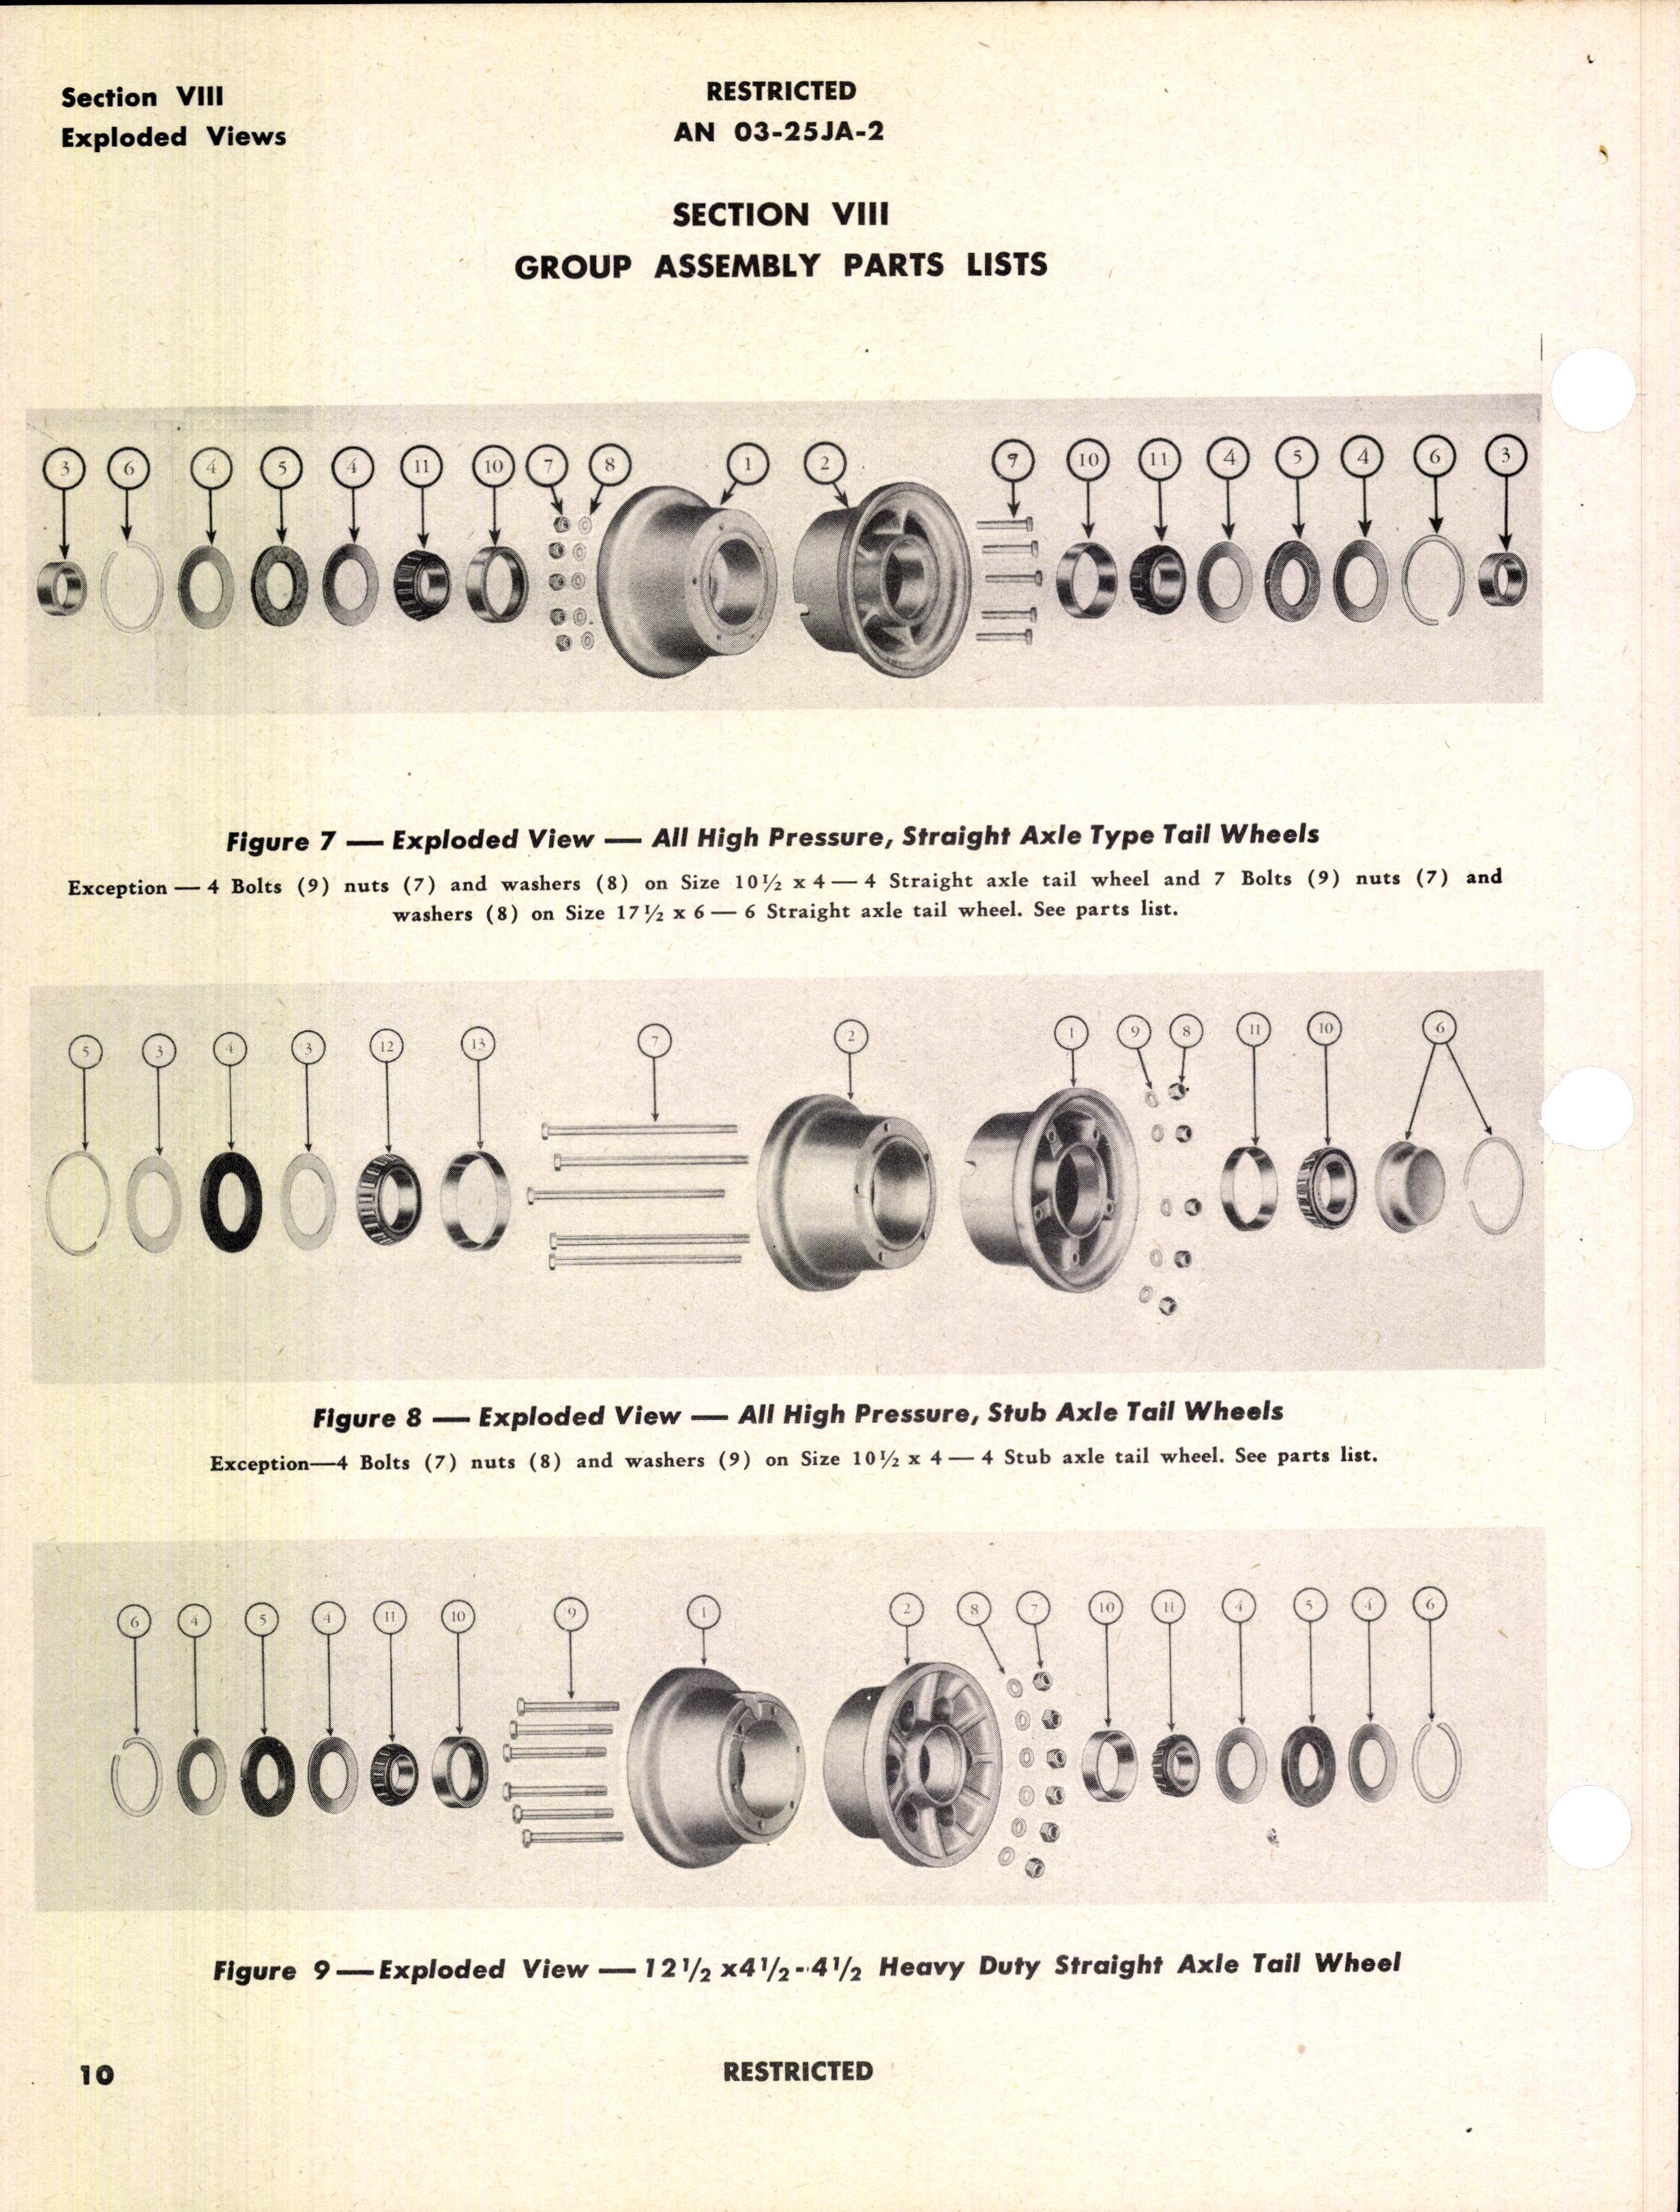 Sample page 14 from AirCorps Library document: Handbook of Instructions with Parts Catalog for High Pressure Tail Wheels